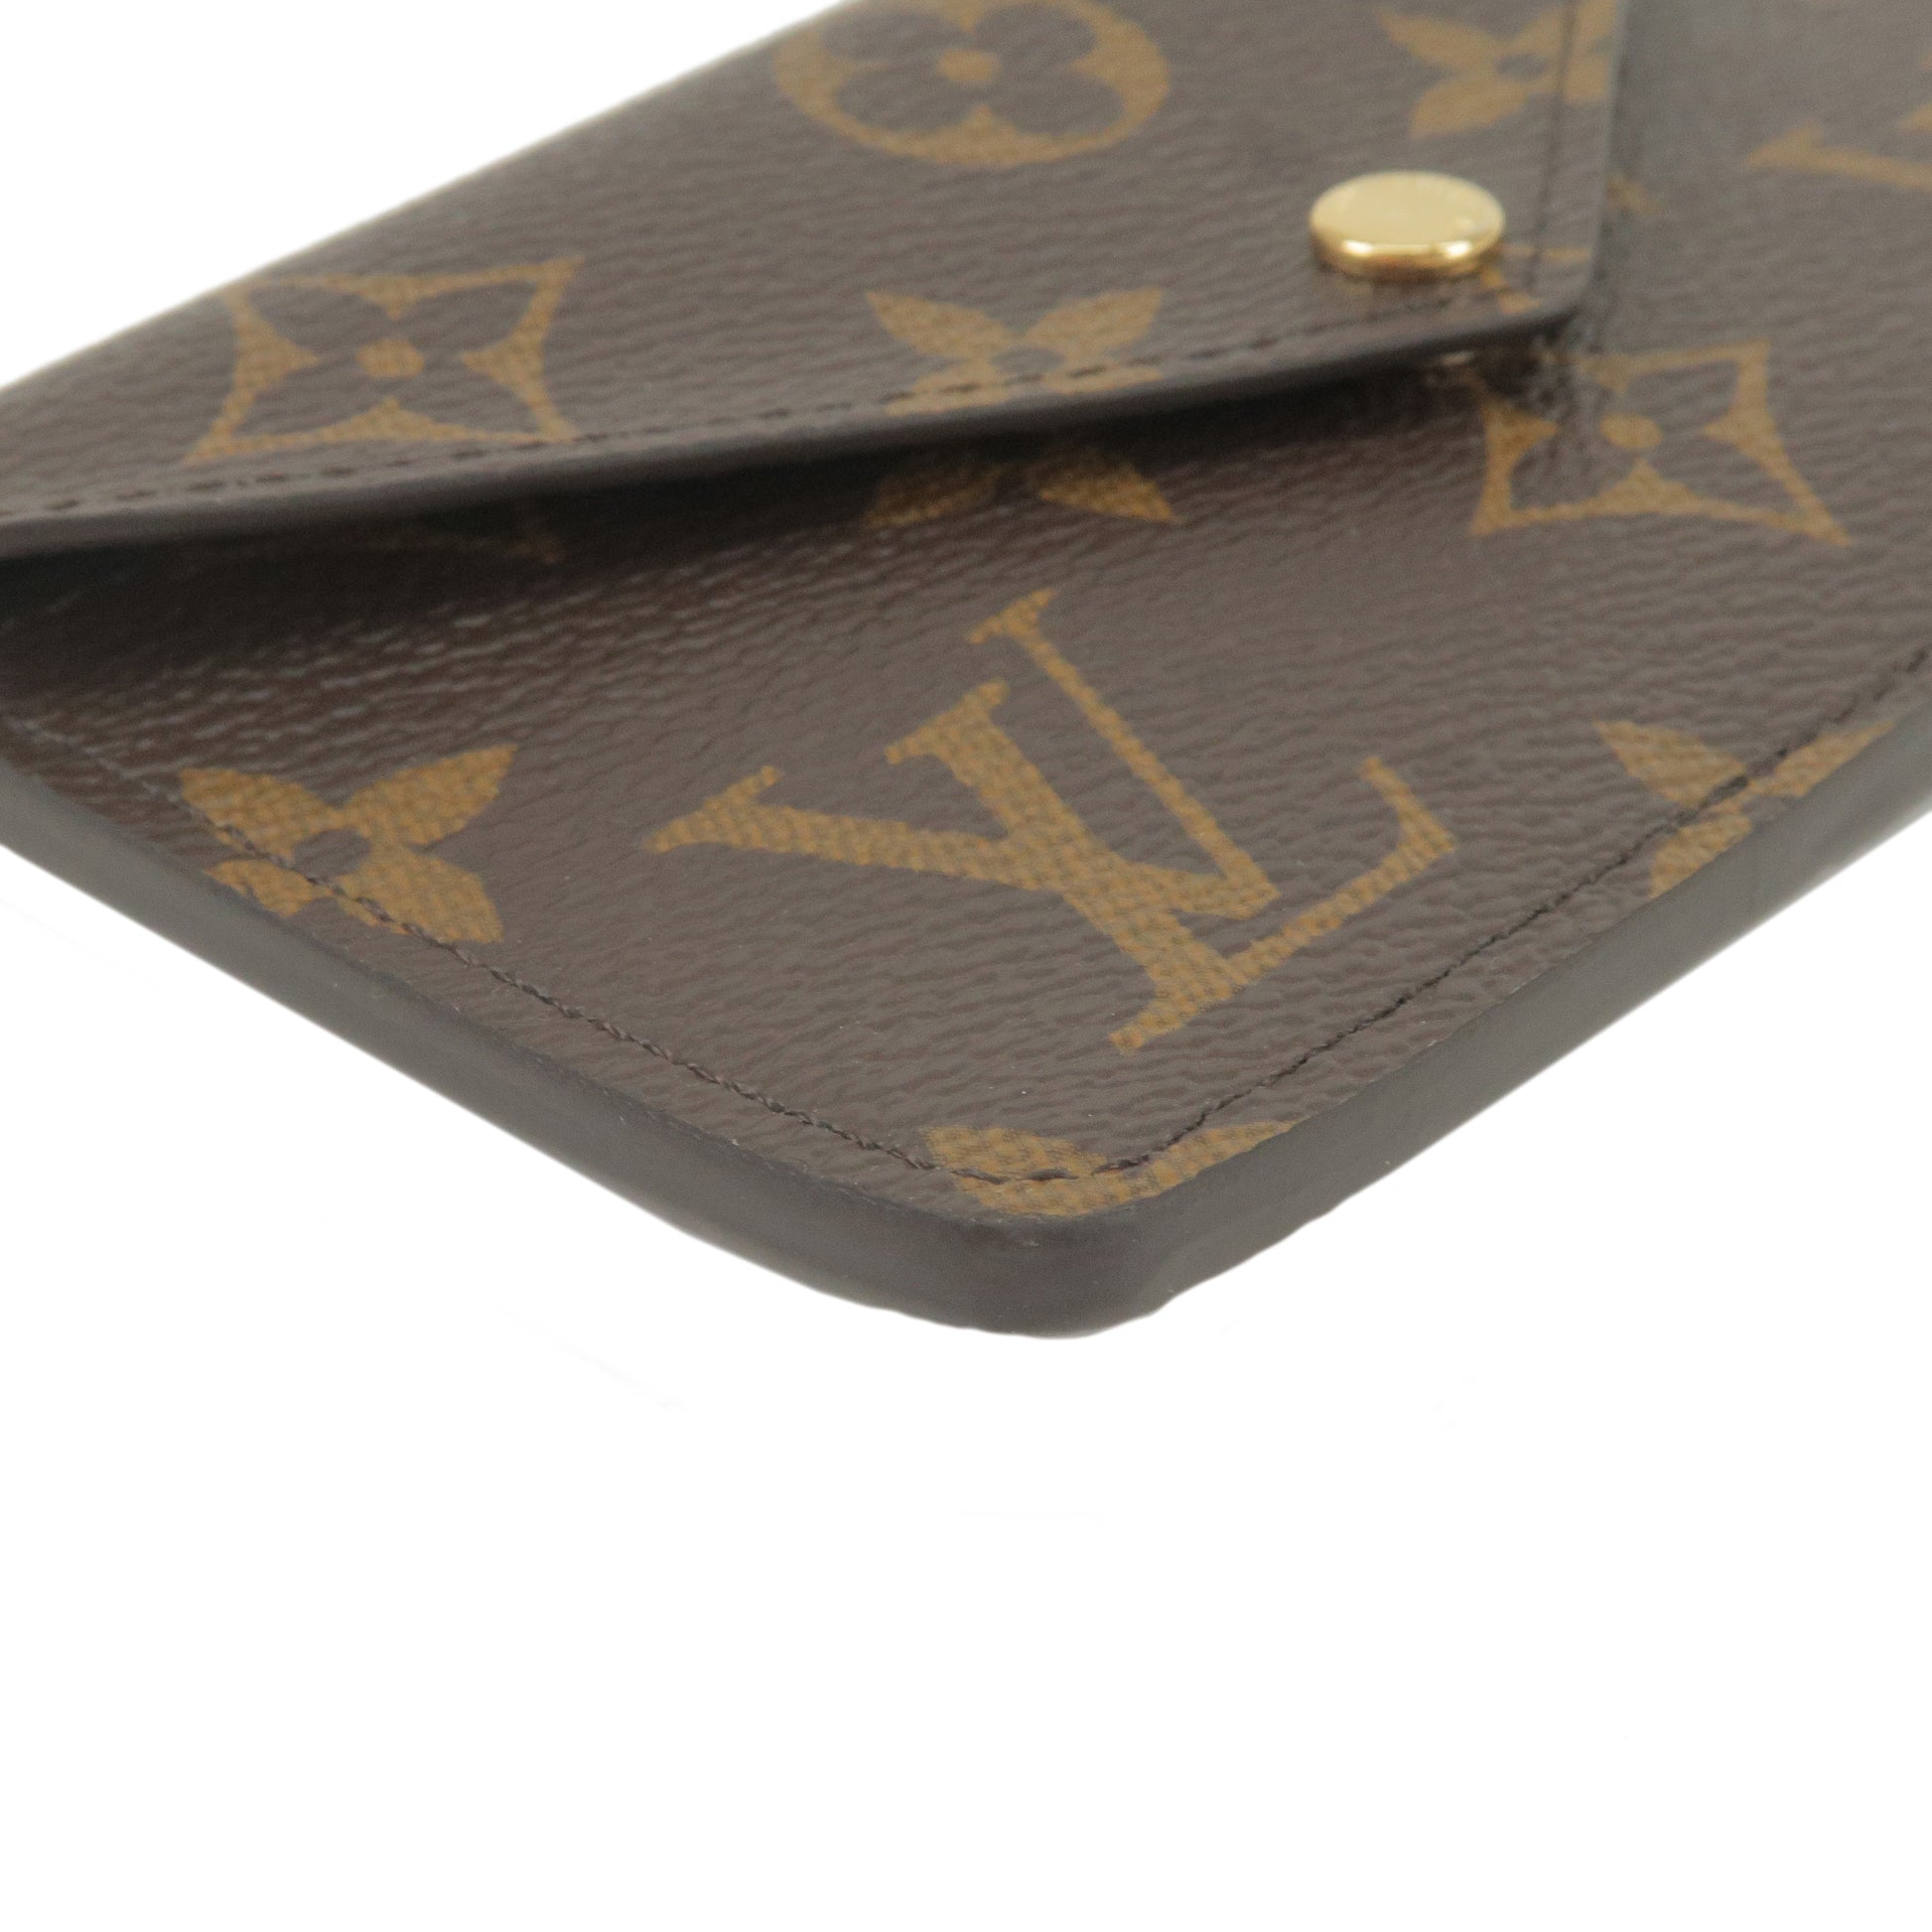 Louis Vuitton New 2022 FOLD ME POUCH Update and Introduction to the LV  ENVELOPE CARD CASE!! 